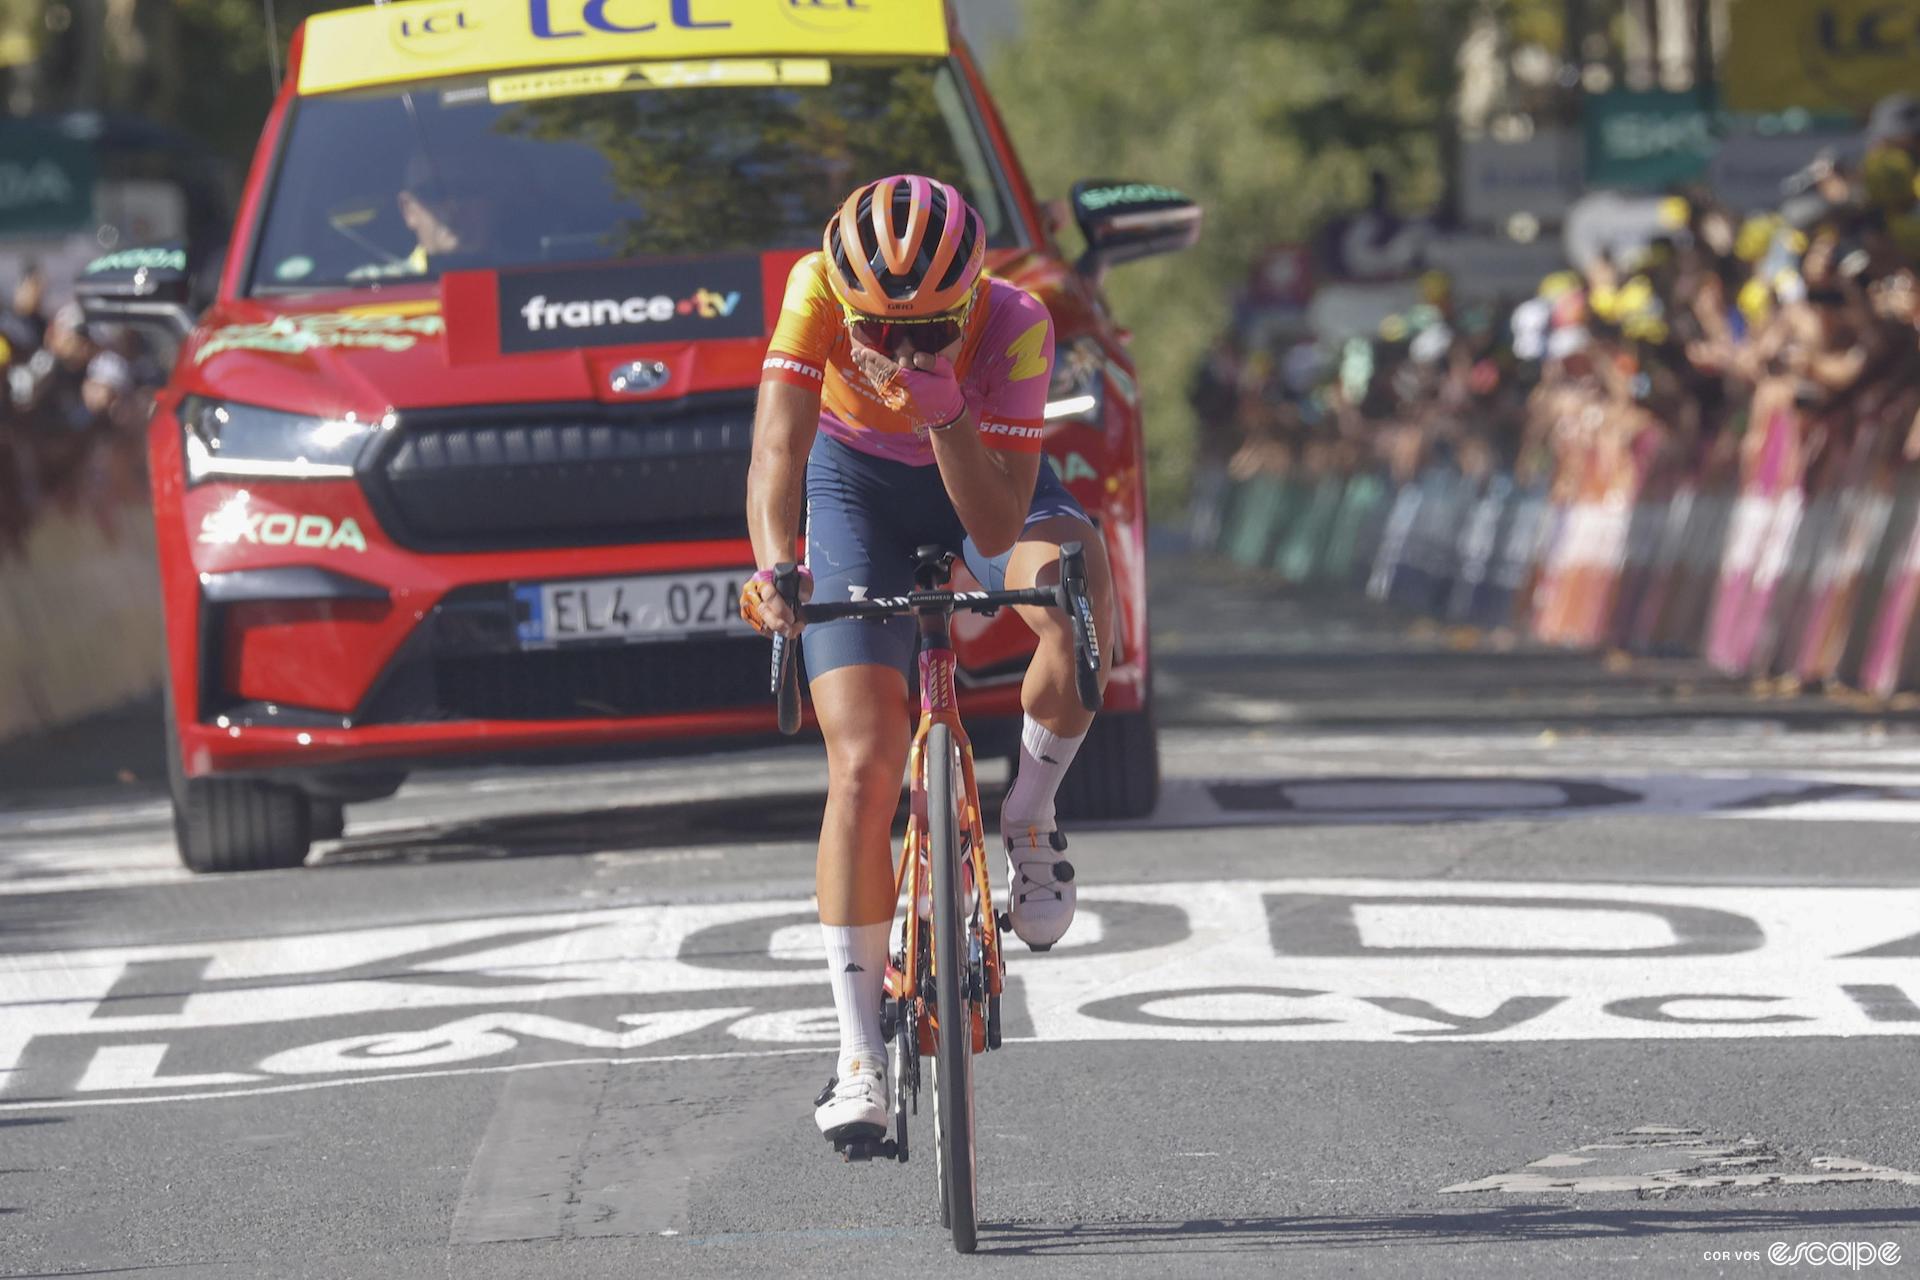 Ricarda Bauernfeind seems surprised to win stage 5 of the 2023 Tour de France Femmes. The Canyon-SRAM rider crosses the line alone from the breakaway and has her hand over her mouth.